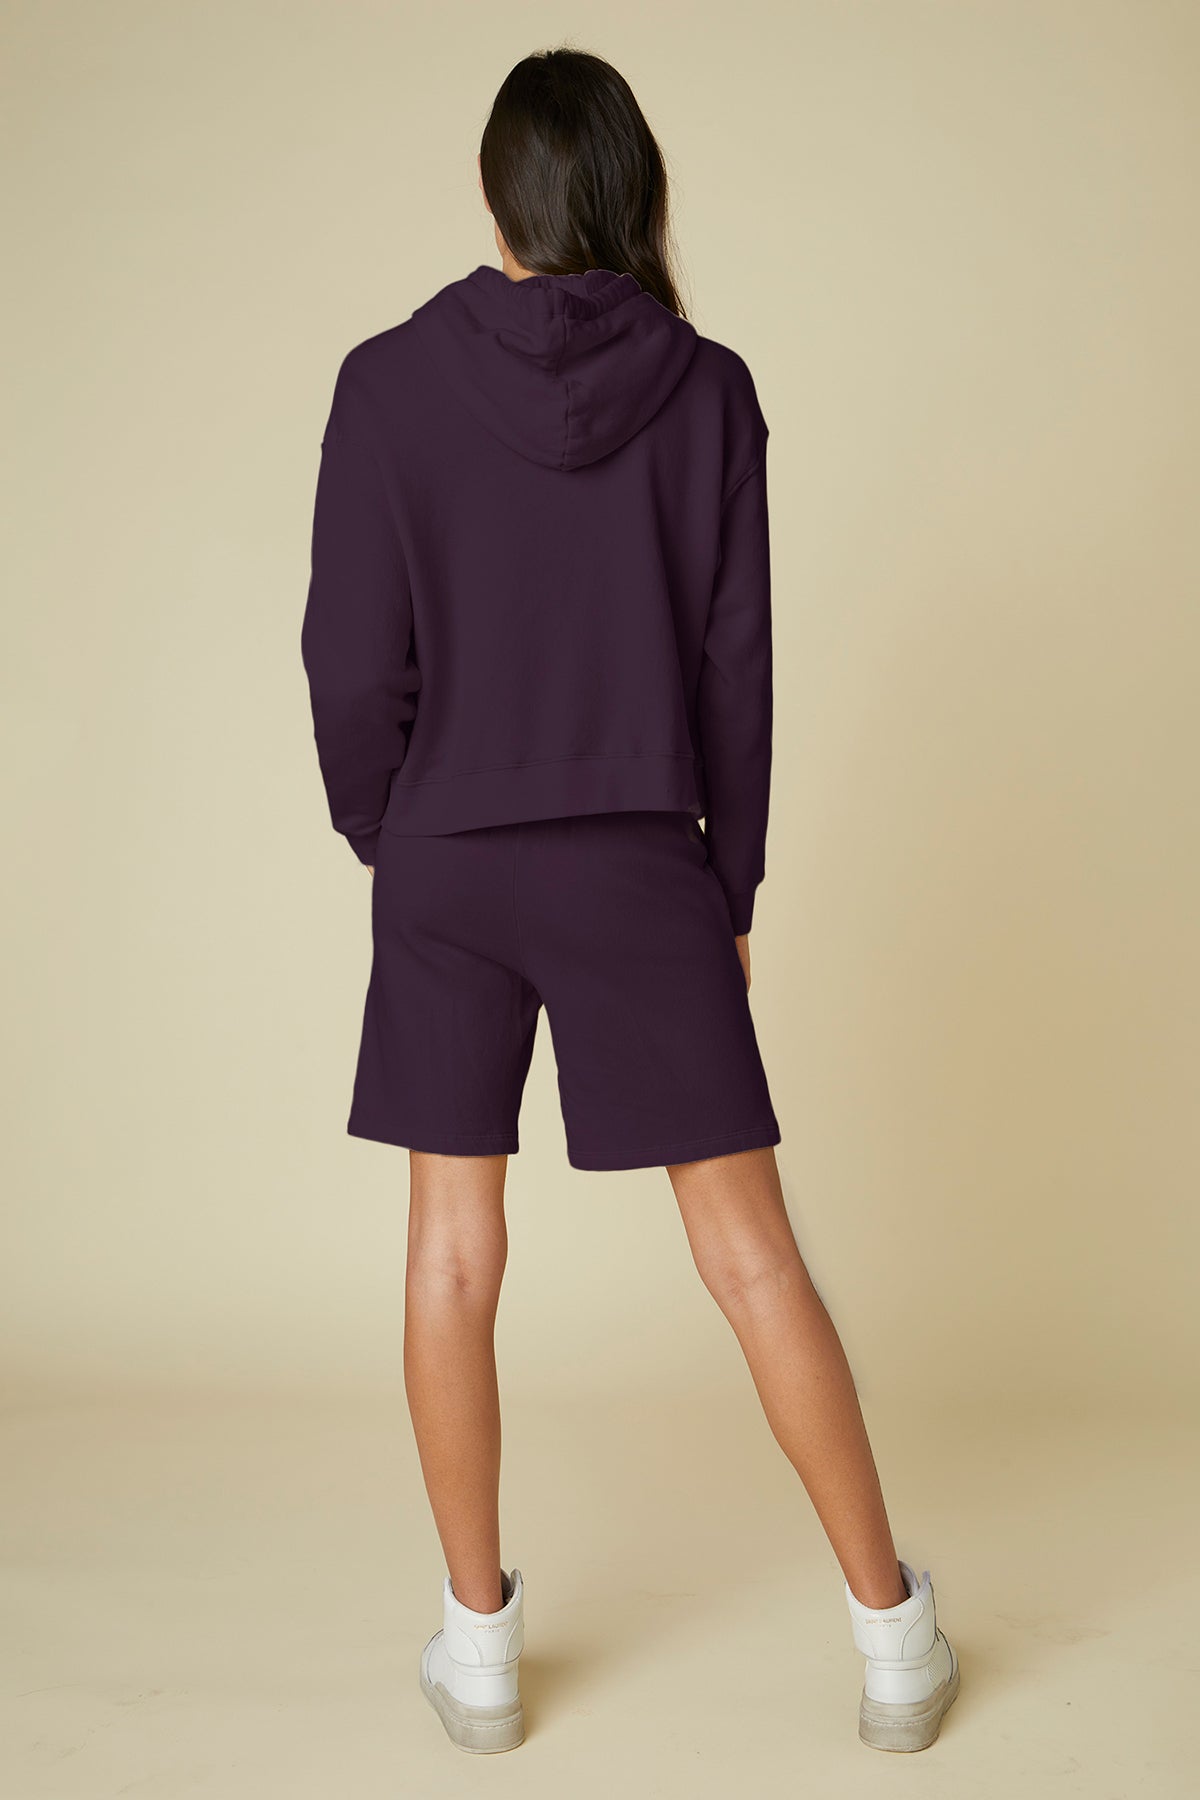 The back view of a woman wearing Velvet by Jenny Graham's LAGUNA SWEATSHORT with an elastic waist, paired with a purple hoodie.-24791114547393